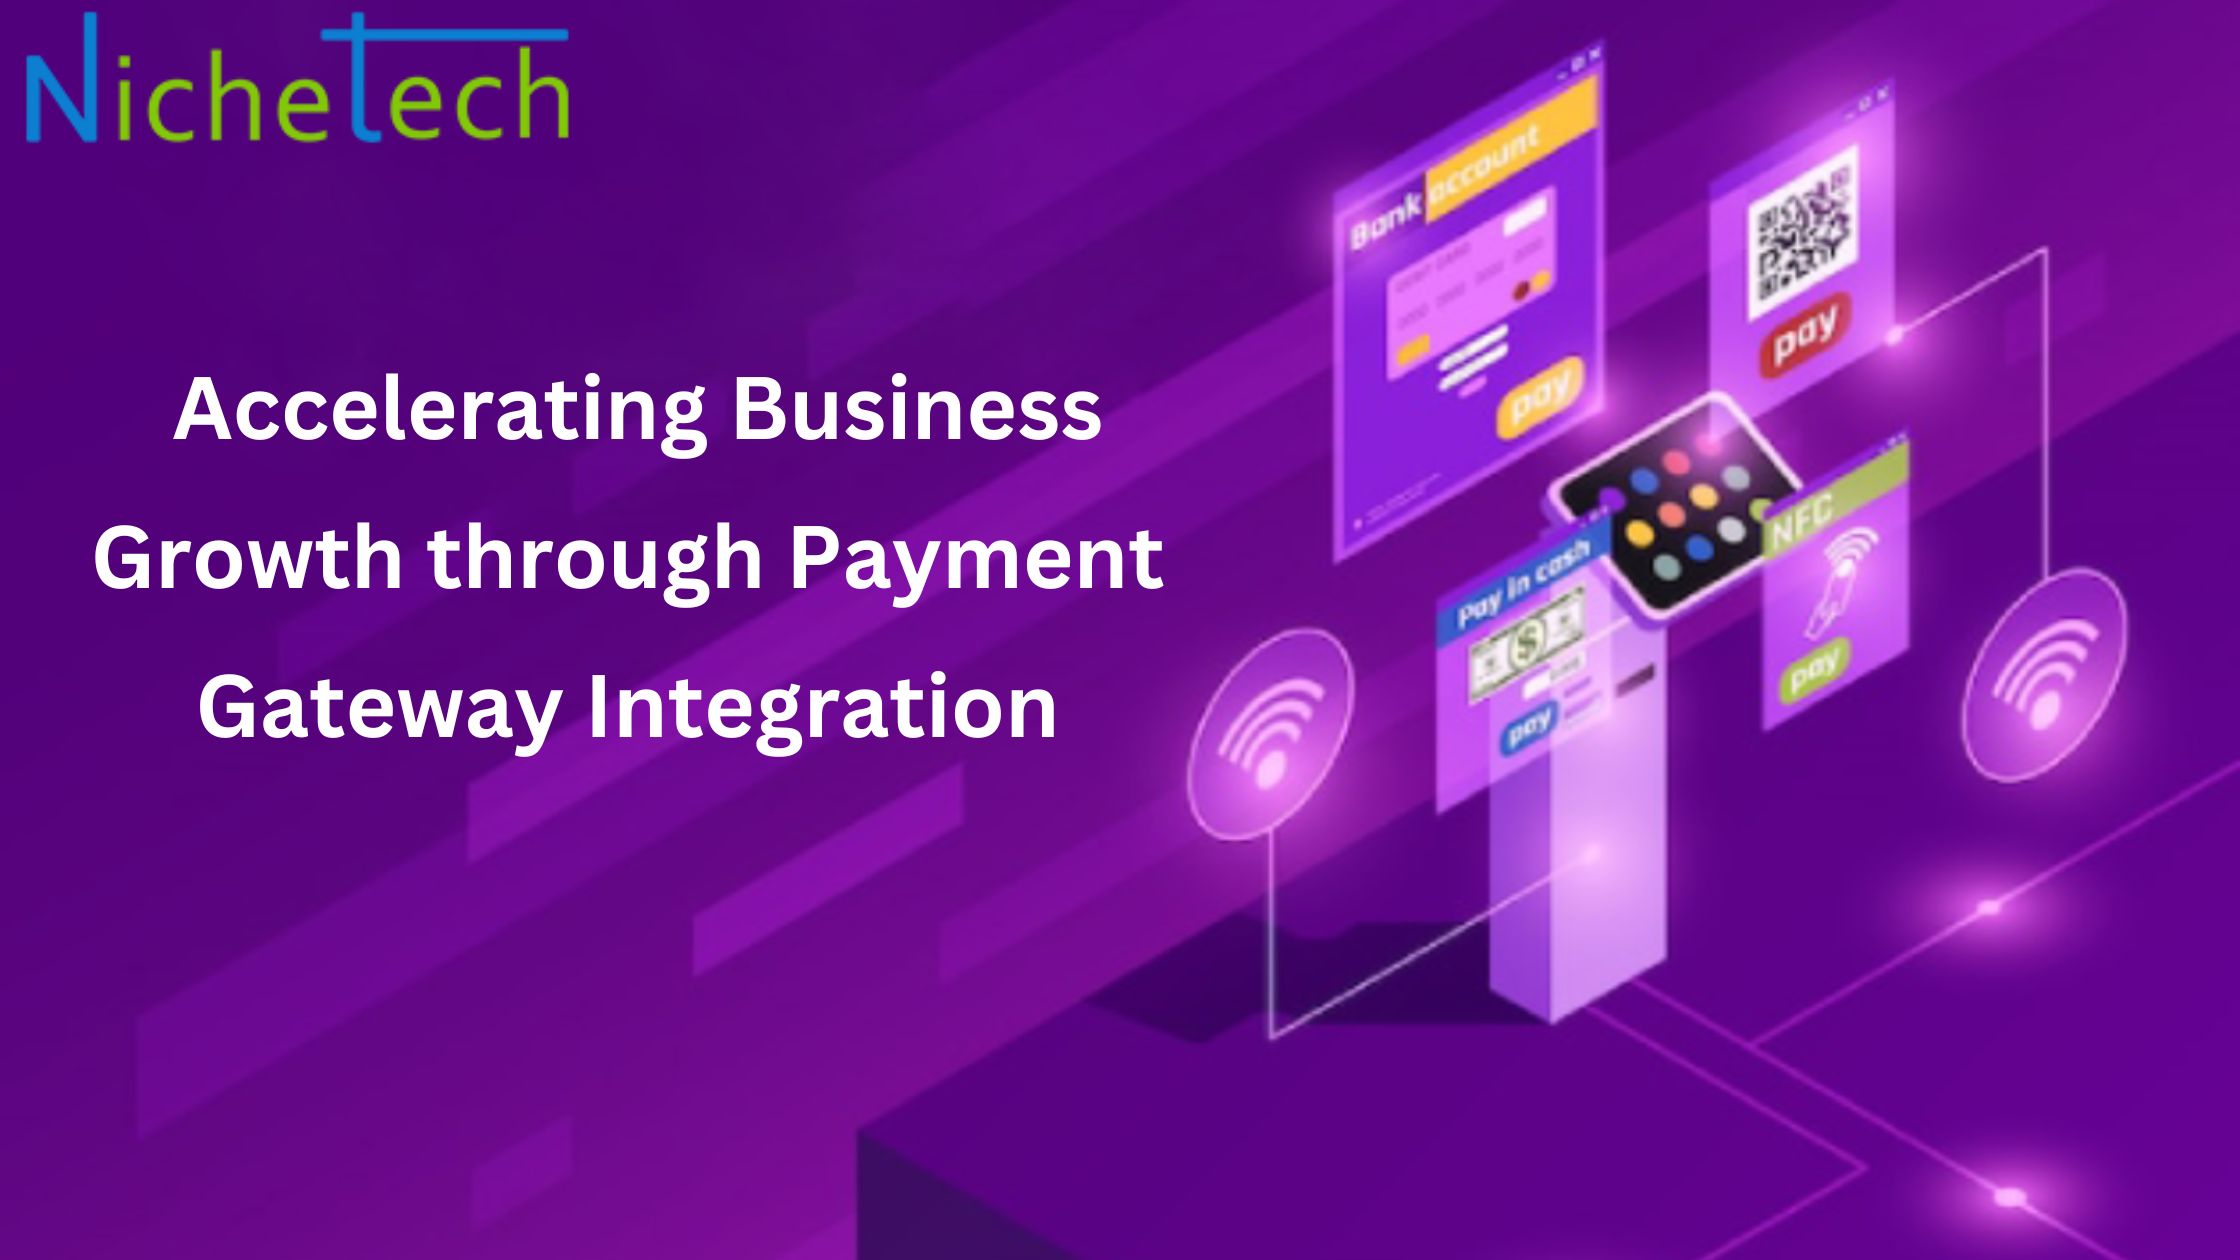 Secure Payment Gateway Integration for Your Business